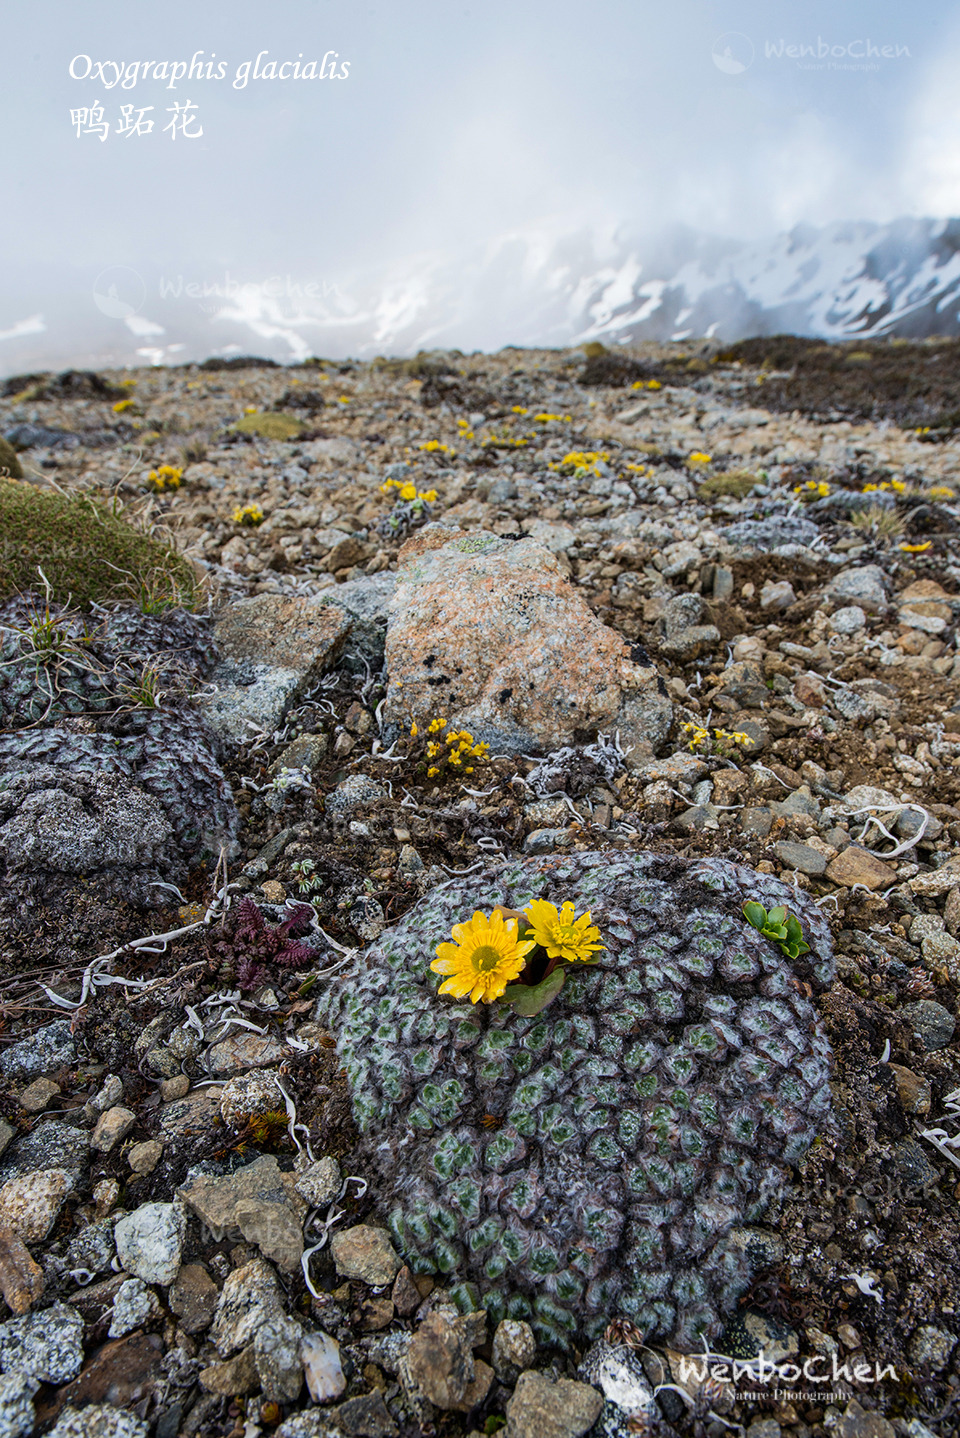 Oxygraphis glacialis grows out of a Chionocharis hookeri. Cushion plants like Chionocharis spp. maintain a higher temperature in their cushion than the outside environment in the alpine region, some cheeky plants decide to take advantage of that. Mt....